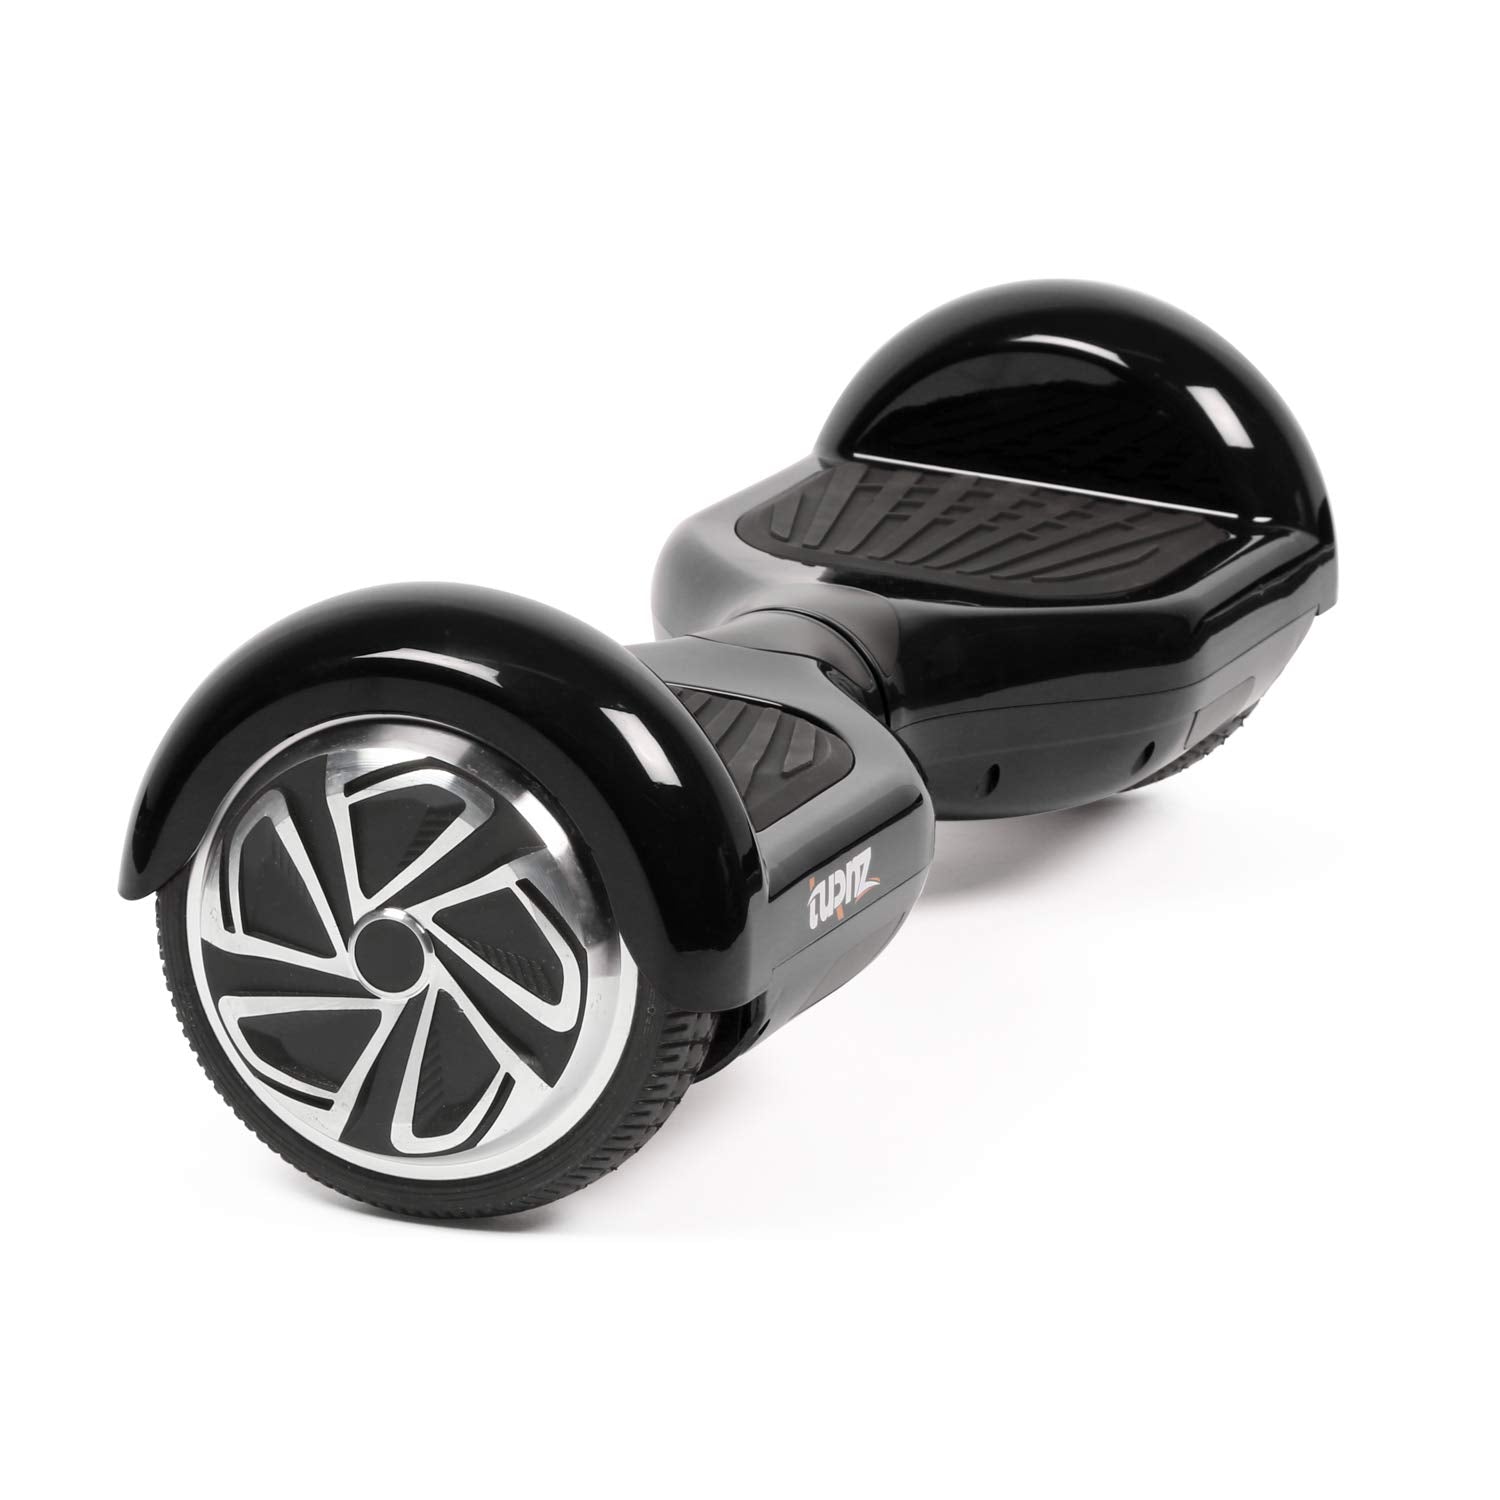 tuRnz Valley650 Self Balancing Hoverboard, 500W Power, UL 2272 Certified, Bluetooth Speaker, Exceptional Long Range Ride (15.5 Miles)  - Very Good